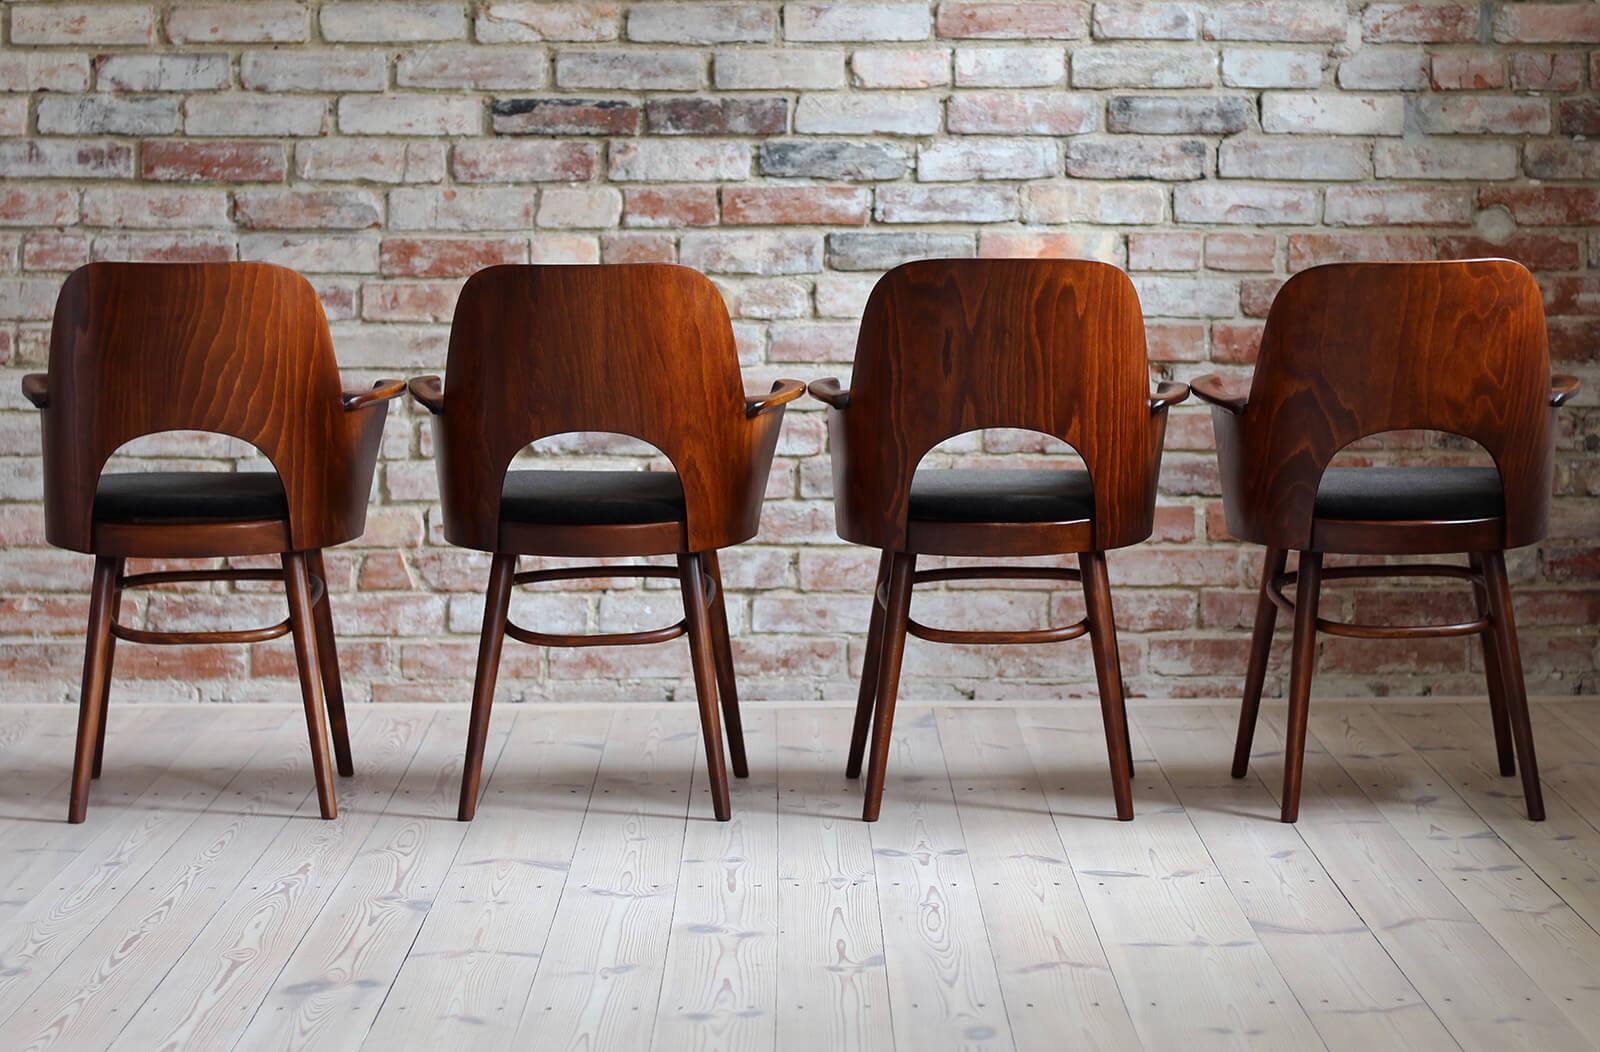 Czech Set of 4 Midcentury Dining Chairs by L. Hofmann, Reupholstered in Kvadrat Fabric